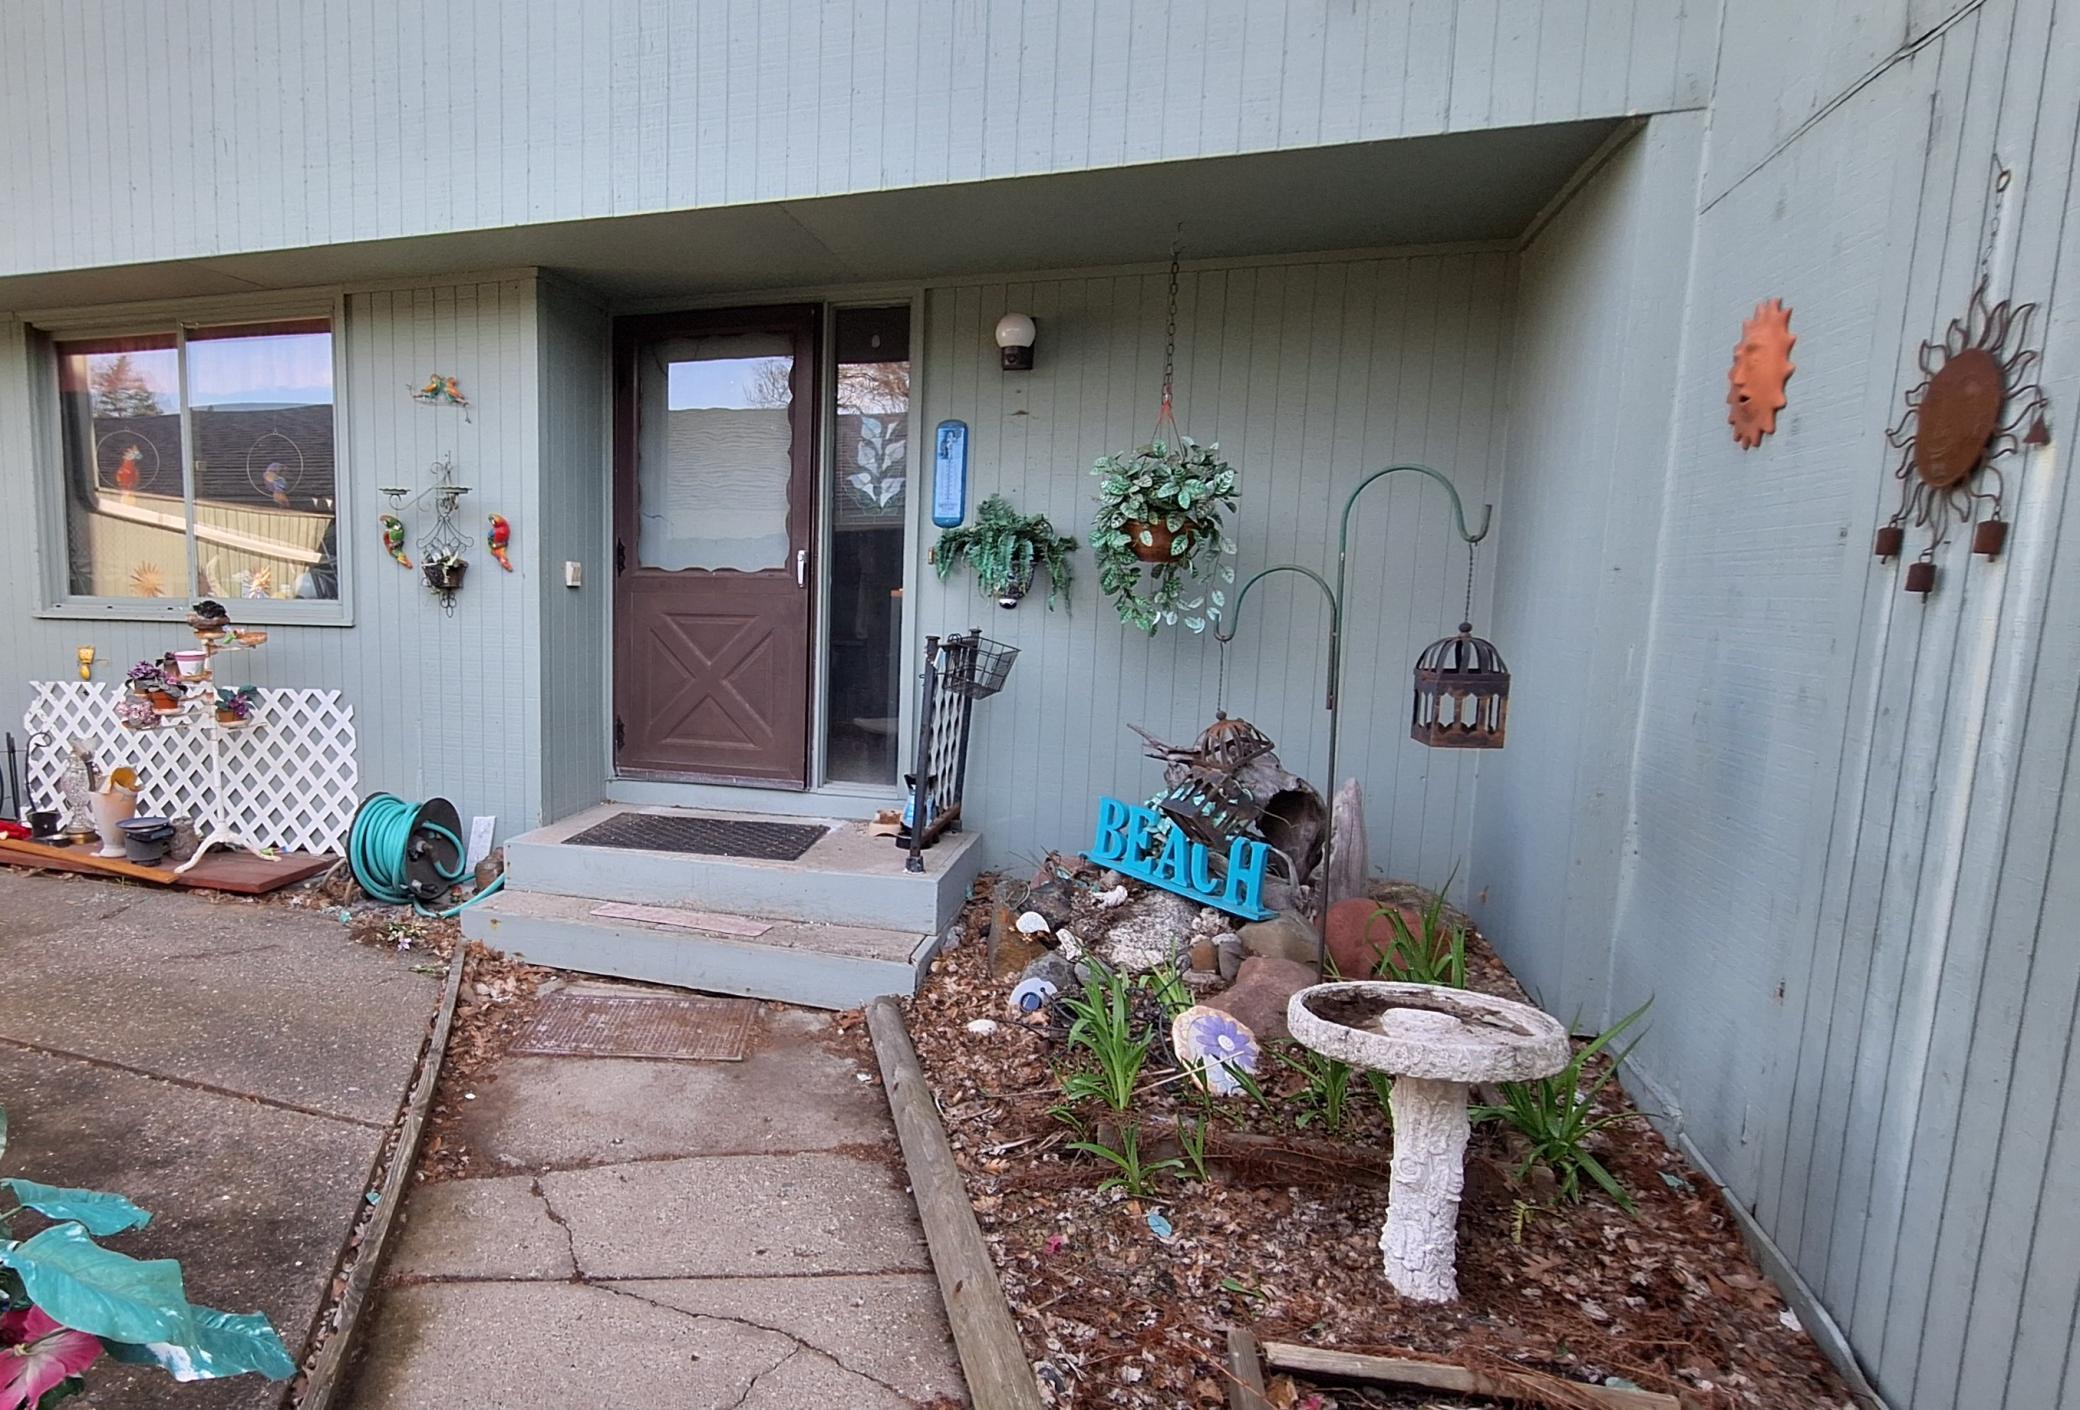 This lovely townhome needs some work but has wonderful potential! This private courtyard is one of three outdoor spaces that can belong to you! Make this courtyard your little oasis.